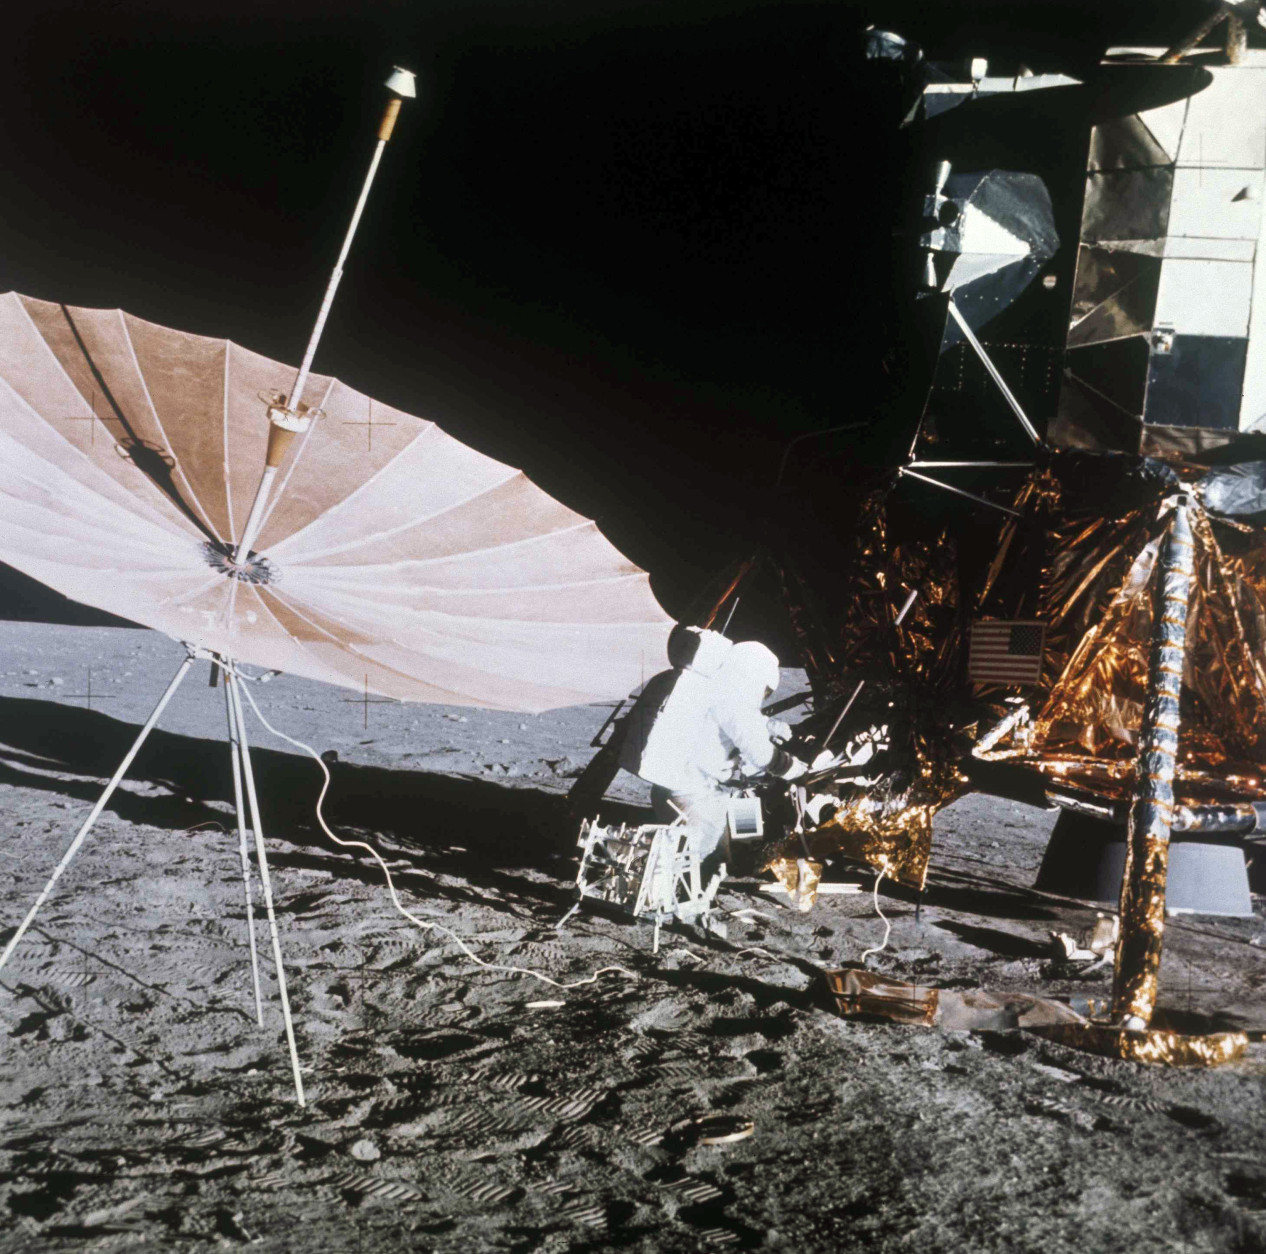 Astronaut of Apollo 12 is shown with equipment on the surface of the moon, Nov. 19, 1969.  (AP Photo)